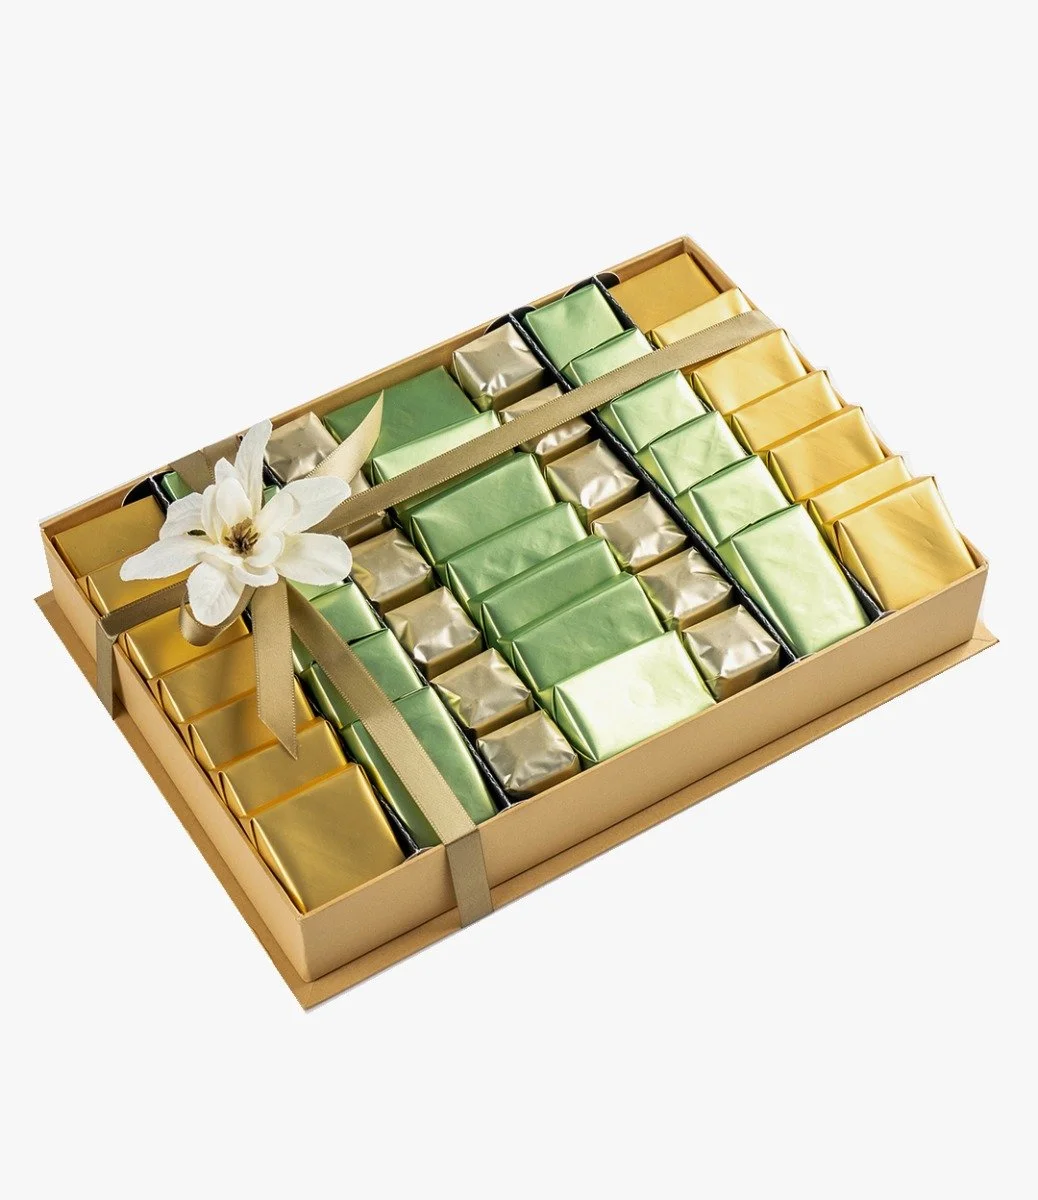 Lime Green Mixed Chocolate Box by Hazem Shaheen Delights  